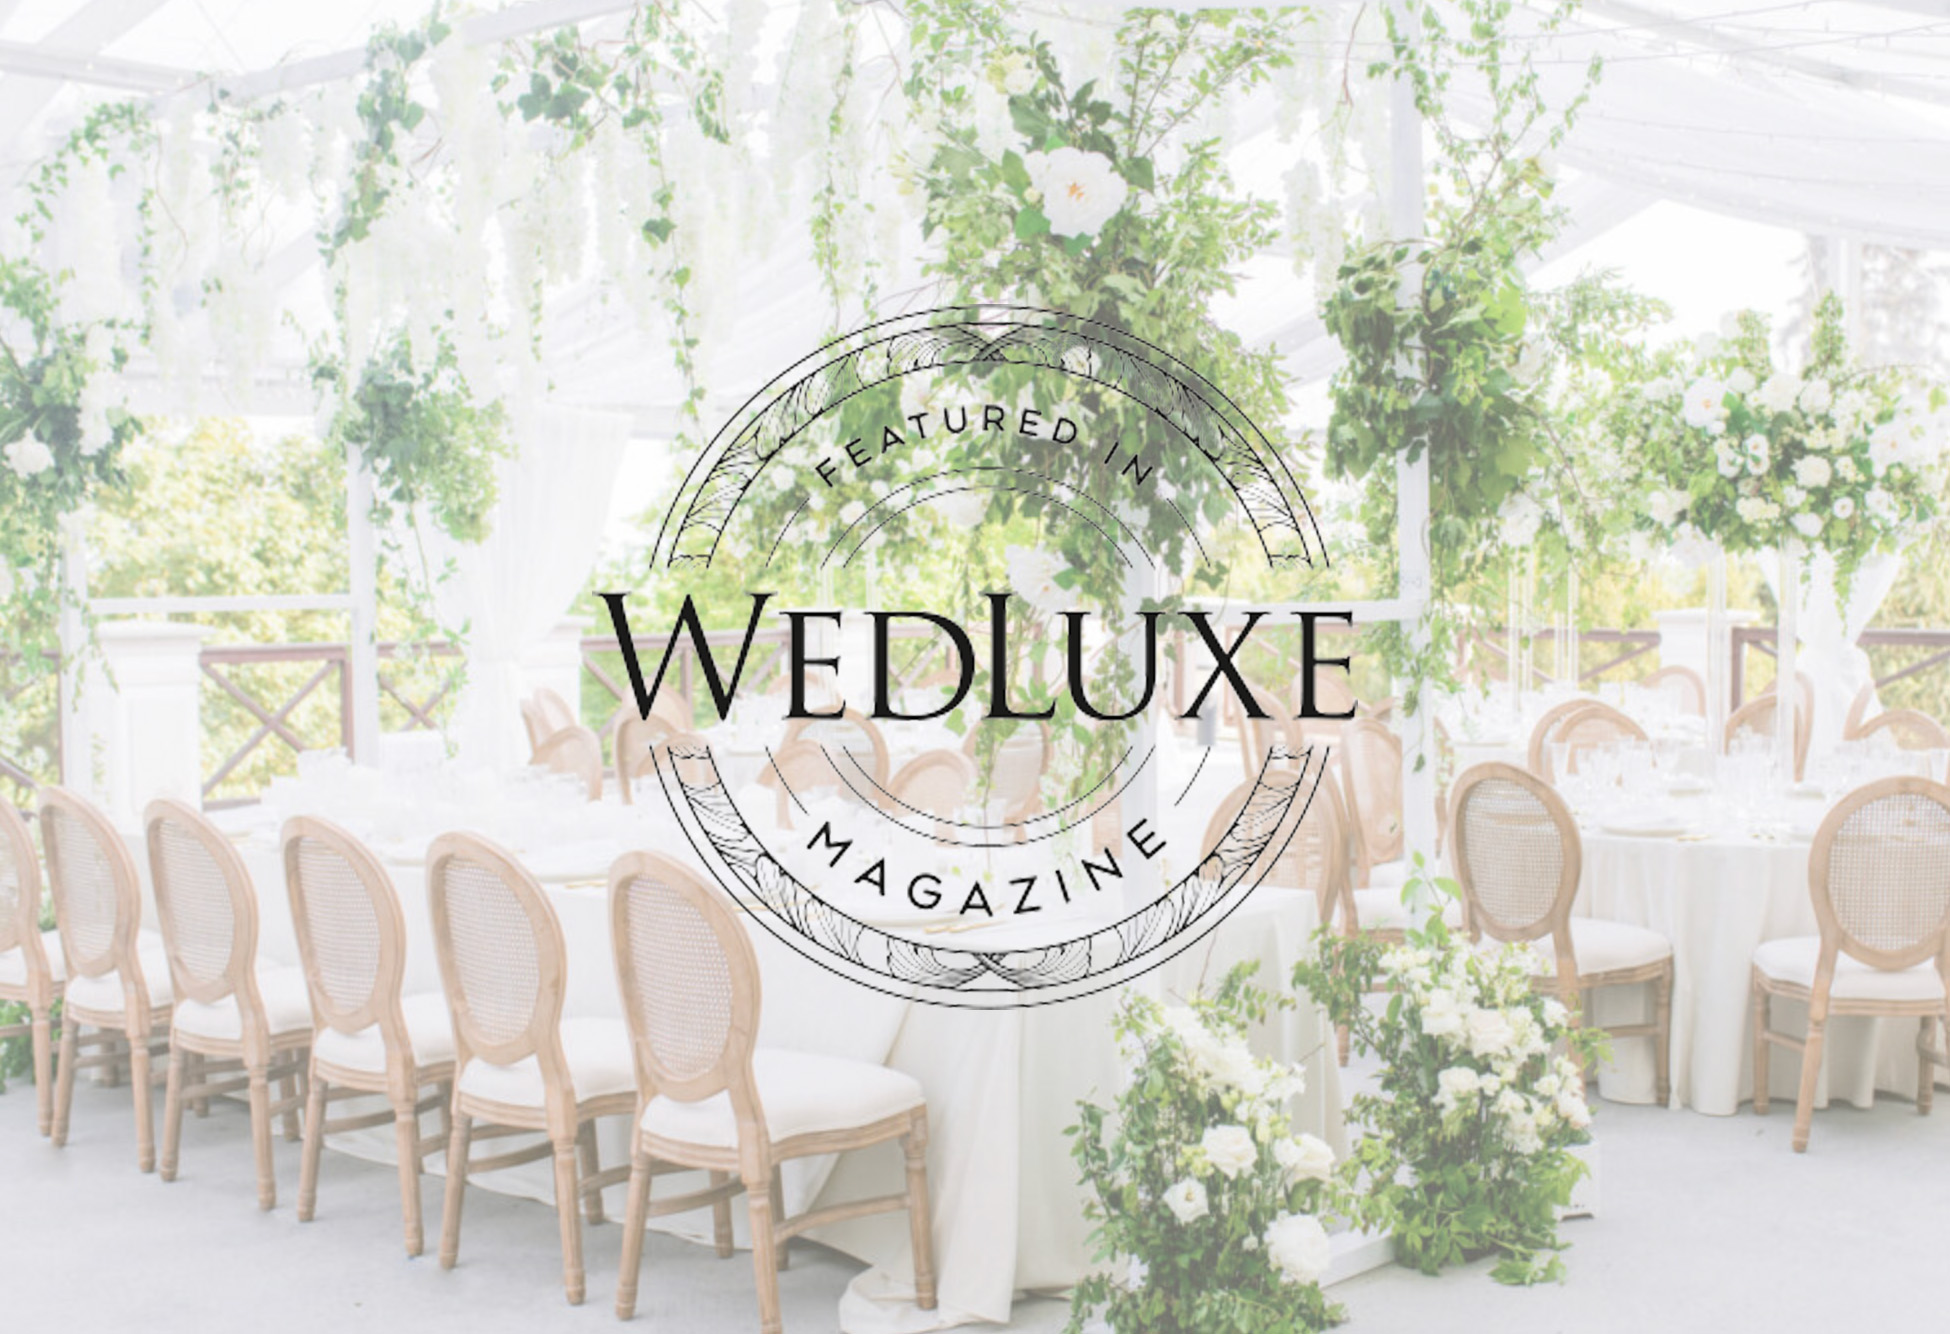 The popular magazine WedLuxe published my work